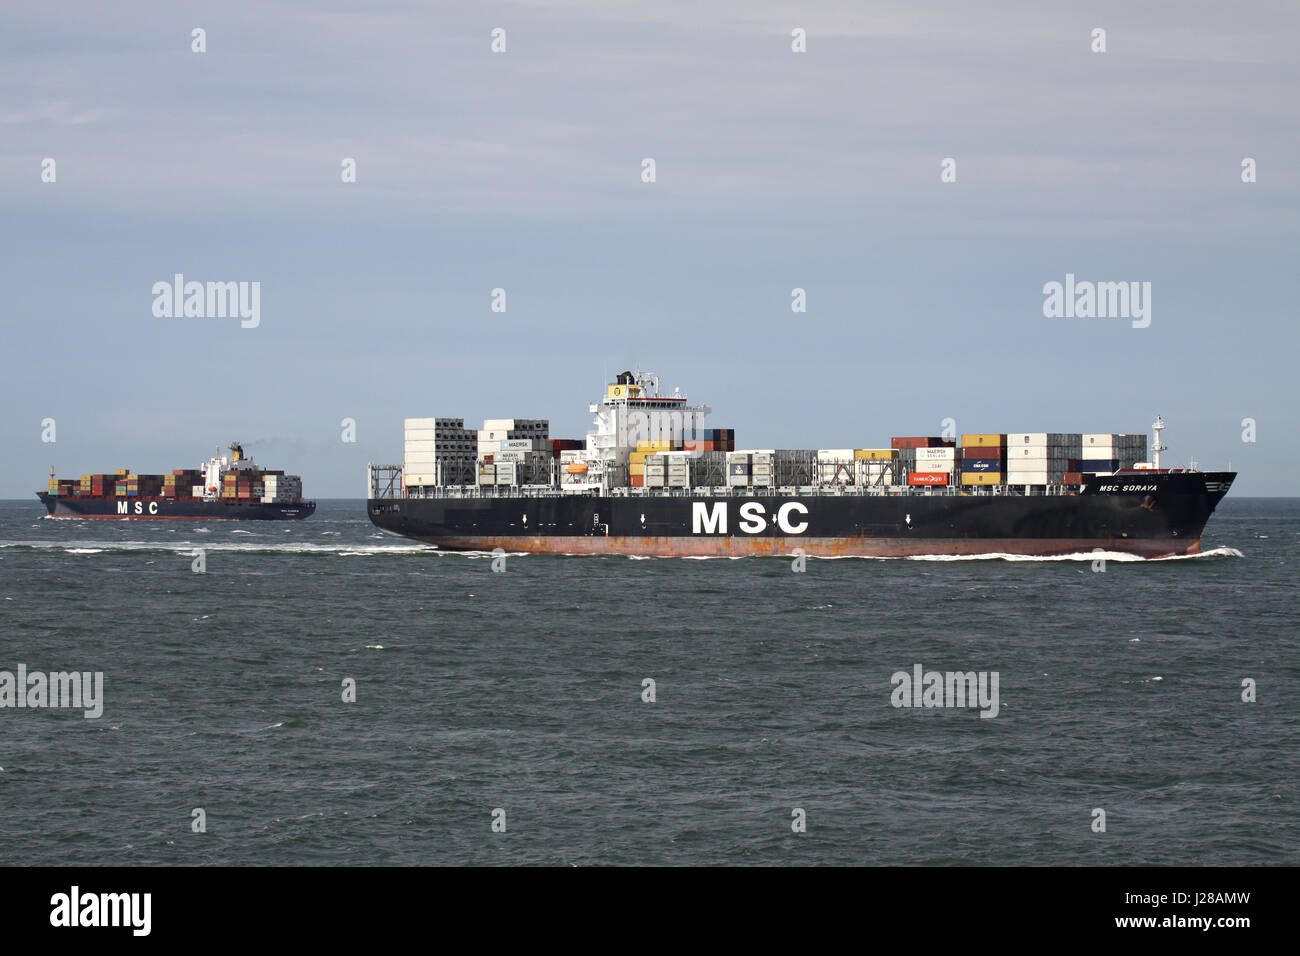 MSC SORAYA and MSC CLAUDIA at Sea. MSC is the world's second-largest shipping line in terms of container vessel capacity. Stock Photo